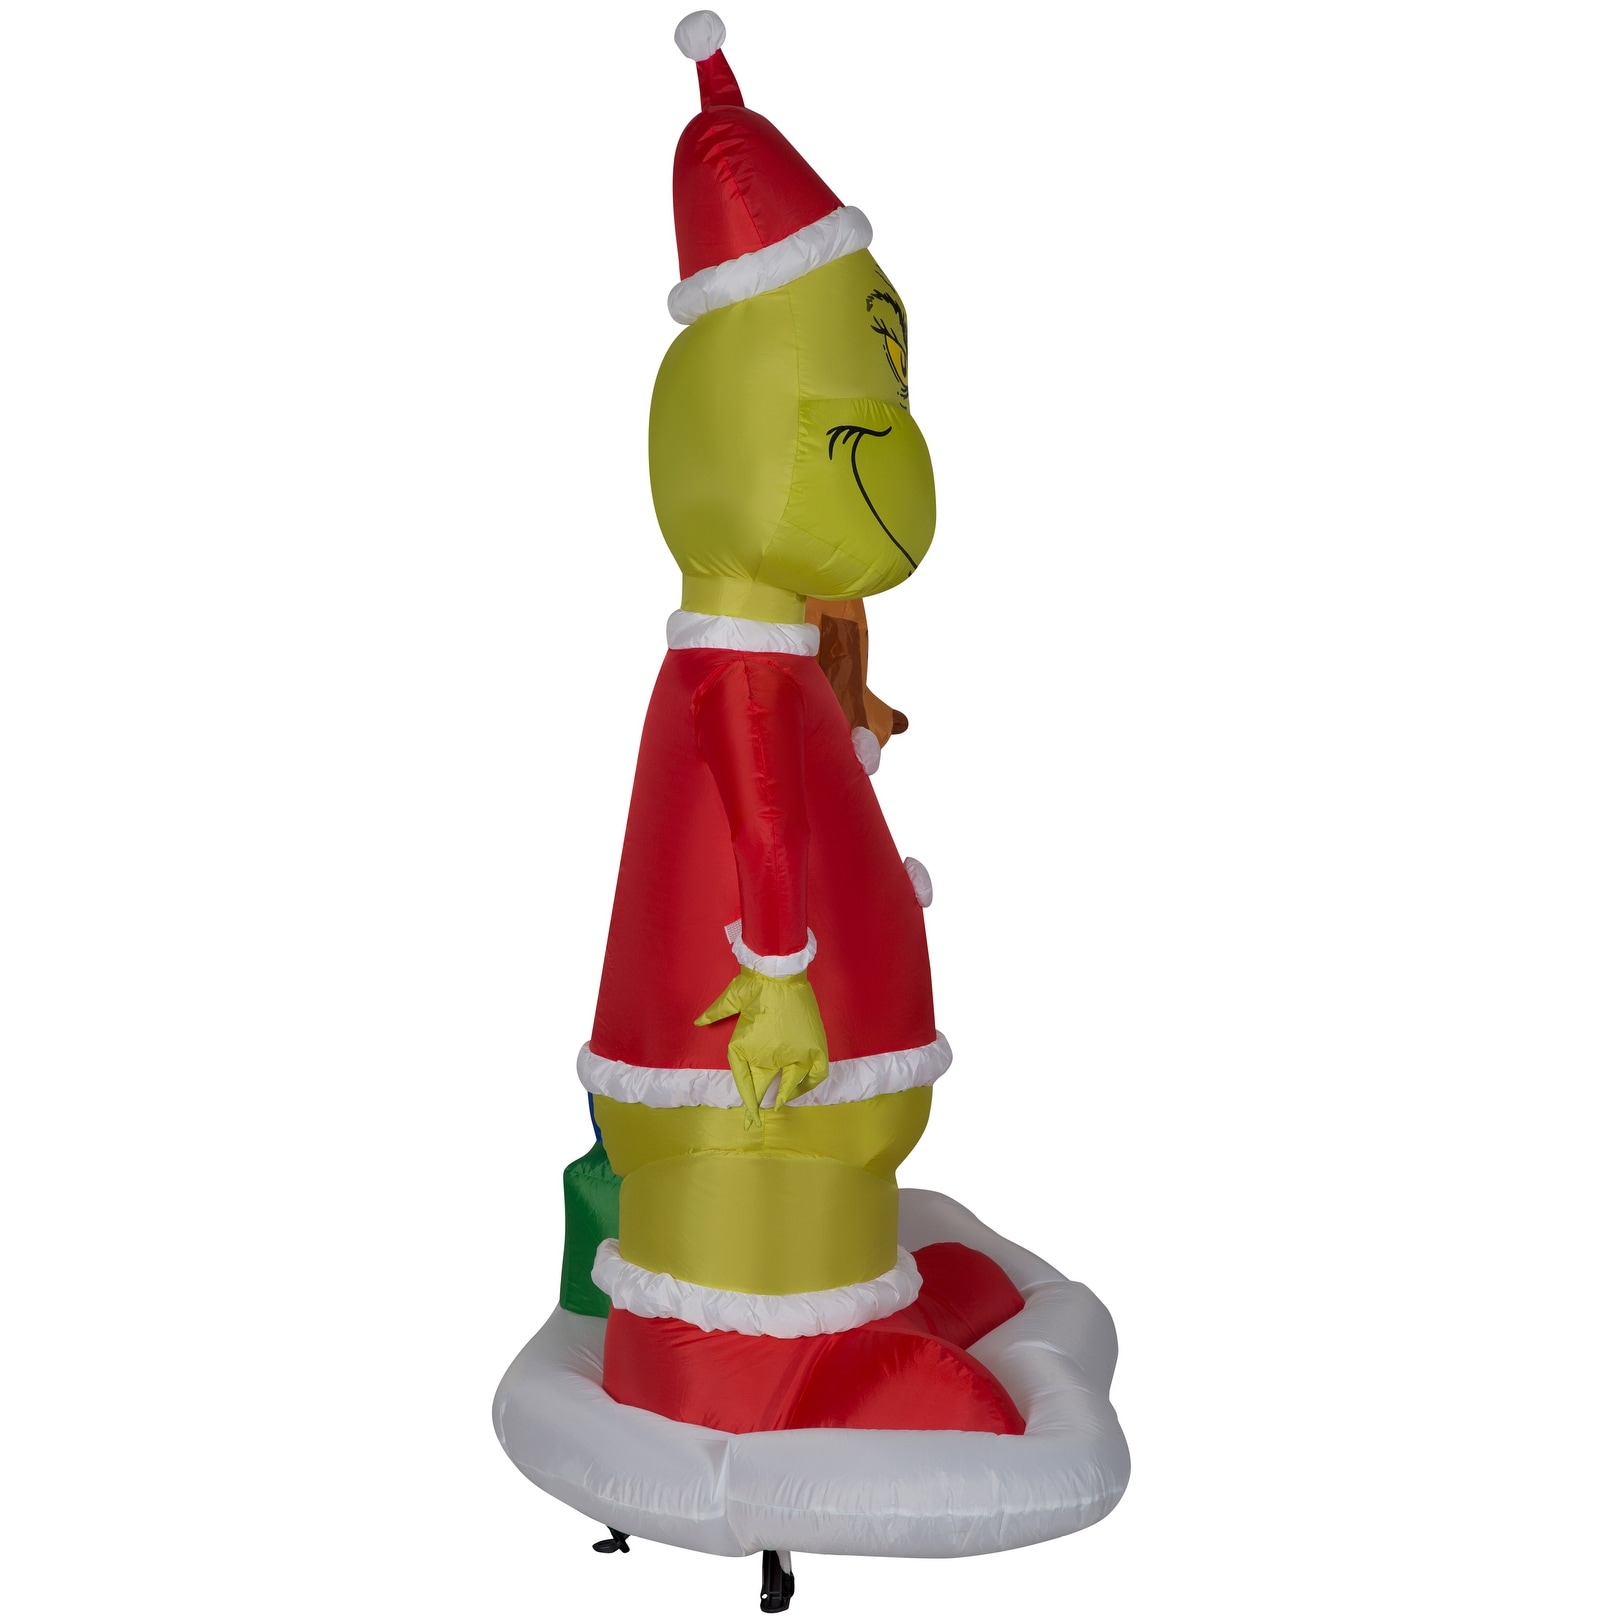 https://ak1.ostkcdn.com/images/products/is/images/direct/8e03231d0286100dd75c23134054269a2e70ce9b/Gemmy-Christmas-Airblown-Inflatable-Grinch-and-Max-w-Presents-Scene-Dr.-Seuss-%2C-6-ft-Tall%2C-Multi.jpg